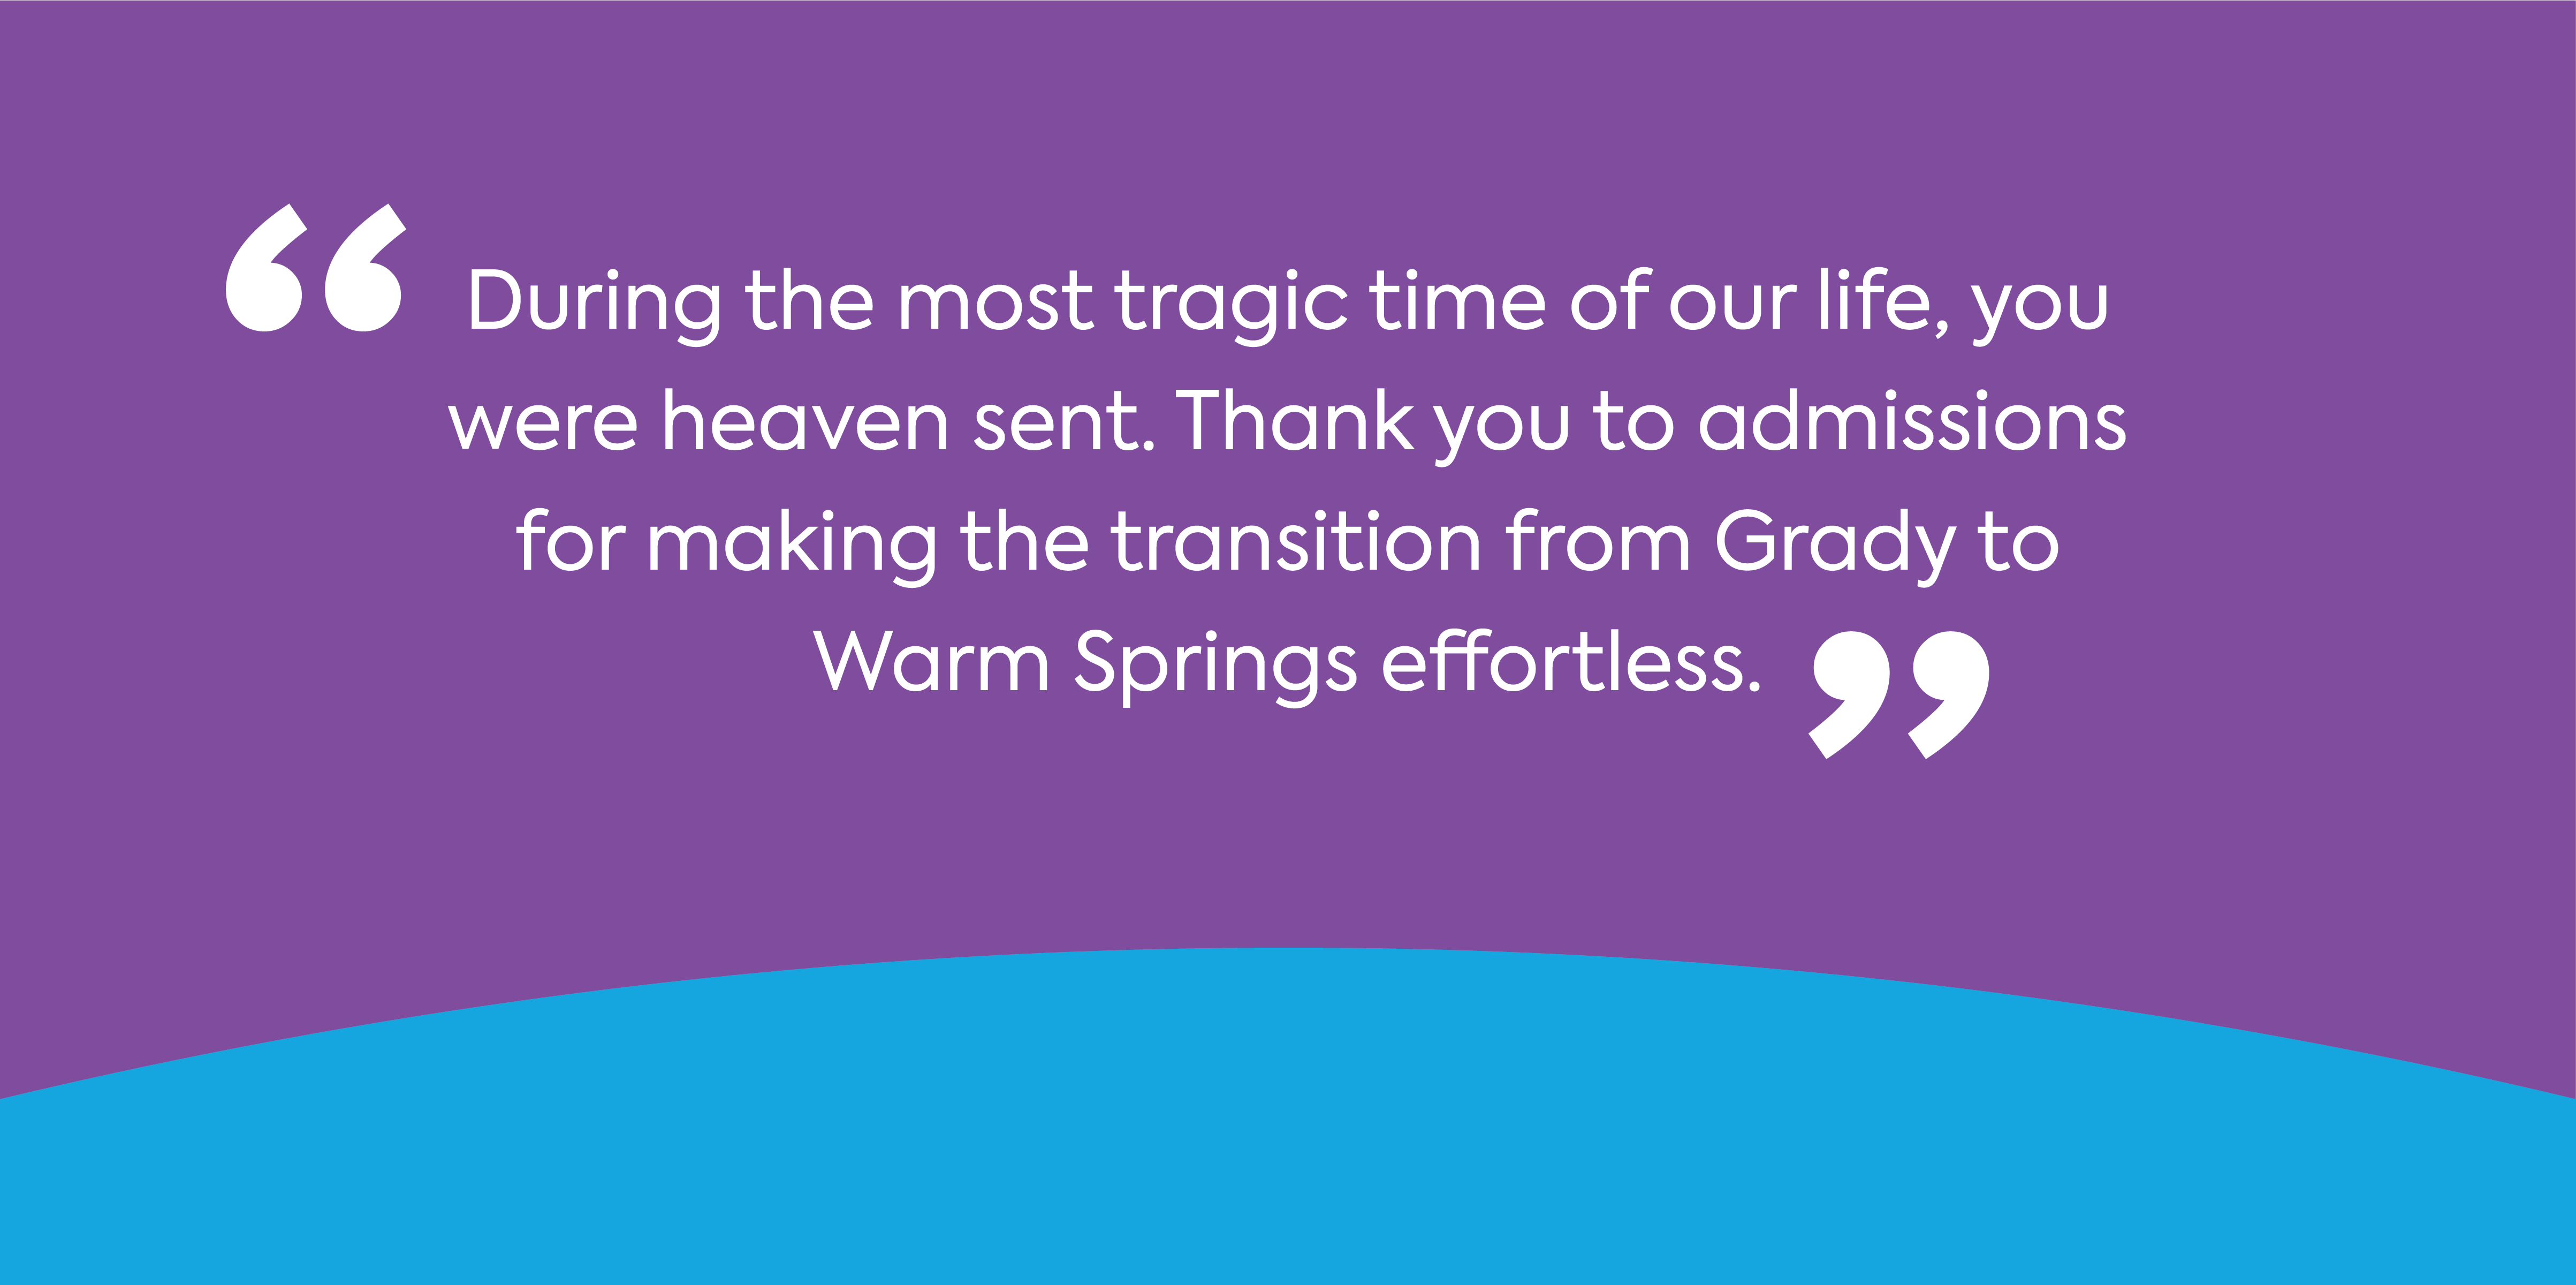 text: During the most tragic time of our life, you were heaven sent. Thank you to admissions for making the transition from Grady to Warm Springs effortless.